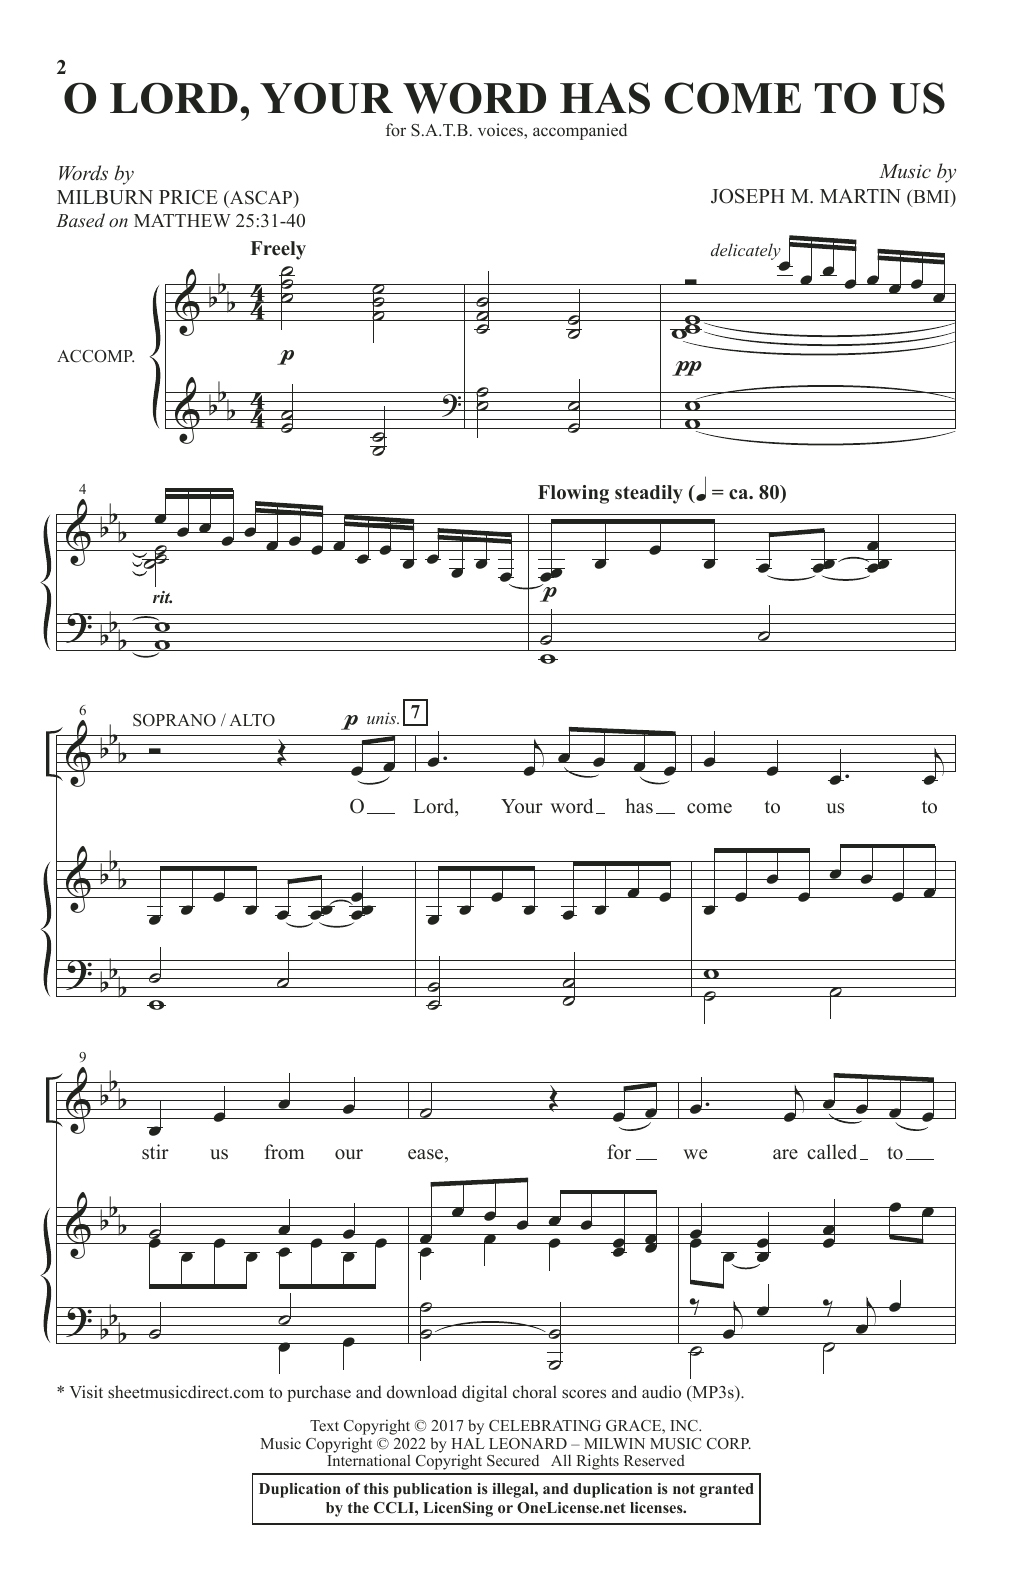 Download Joseph M. Martin & Milburn Price O Lord, Your Word Has Come To Us Sheet Music